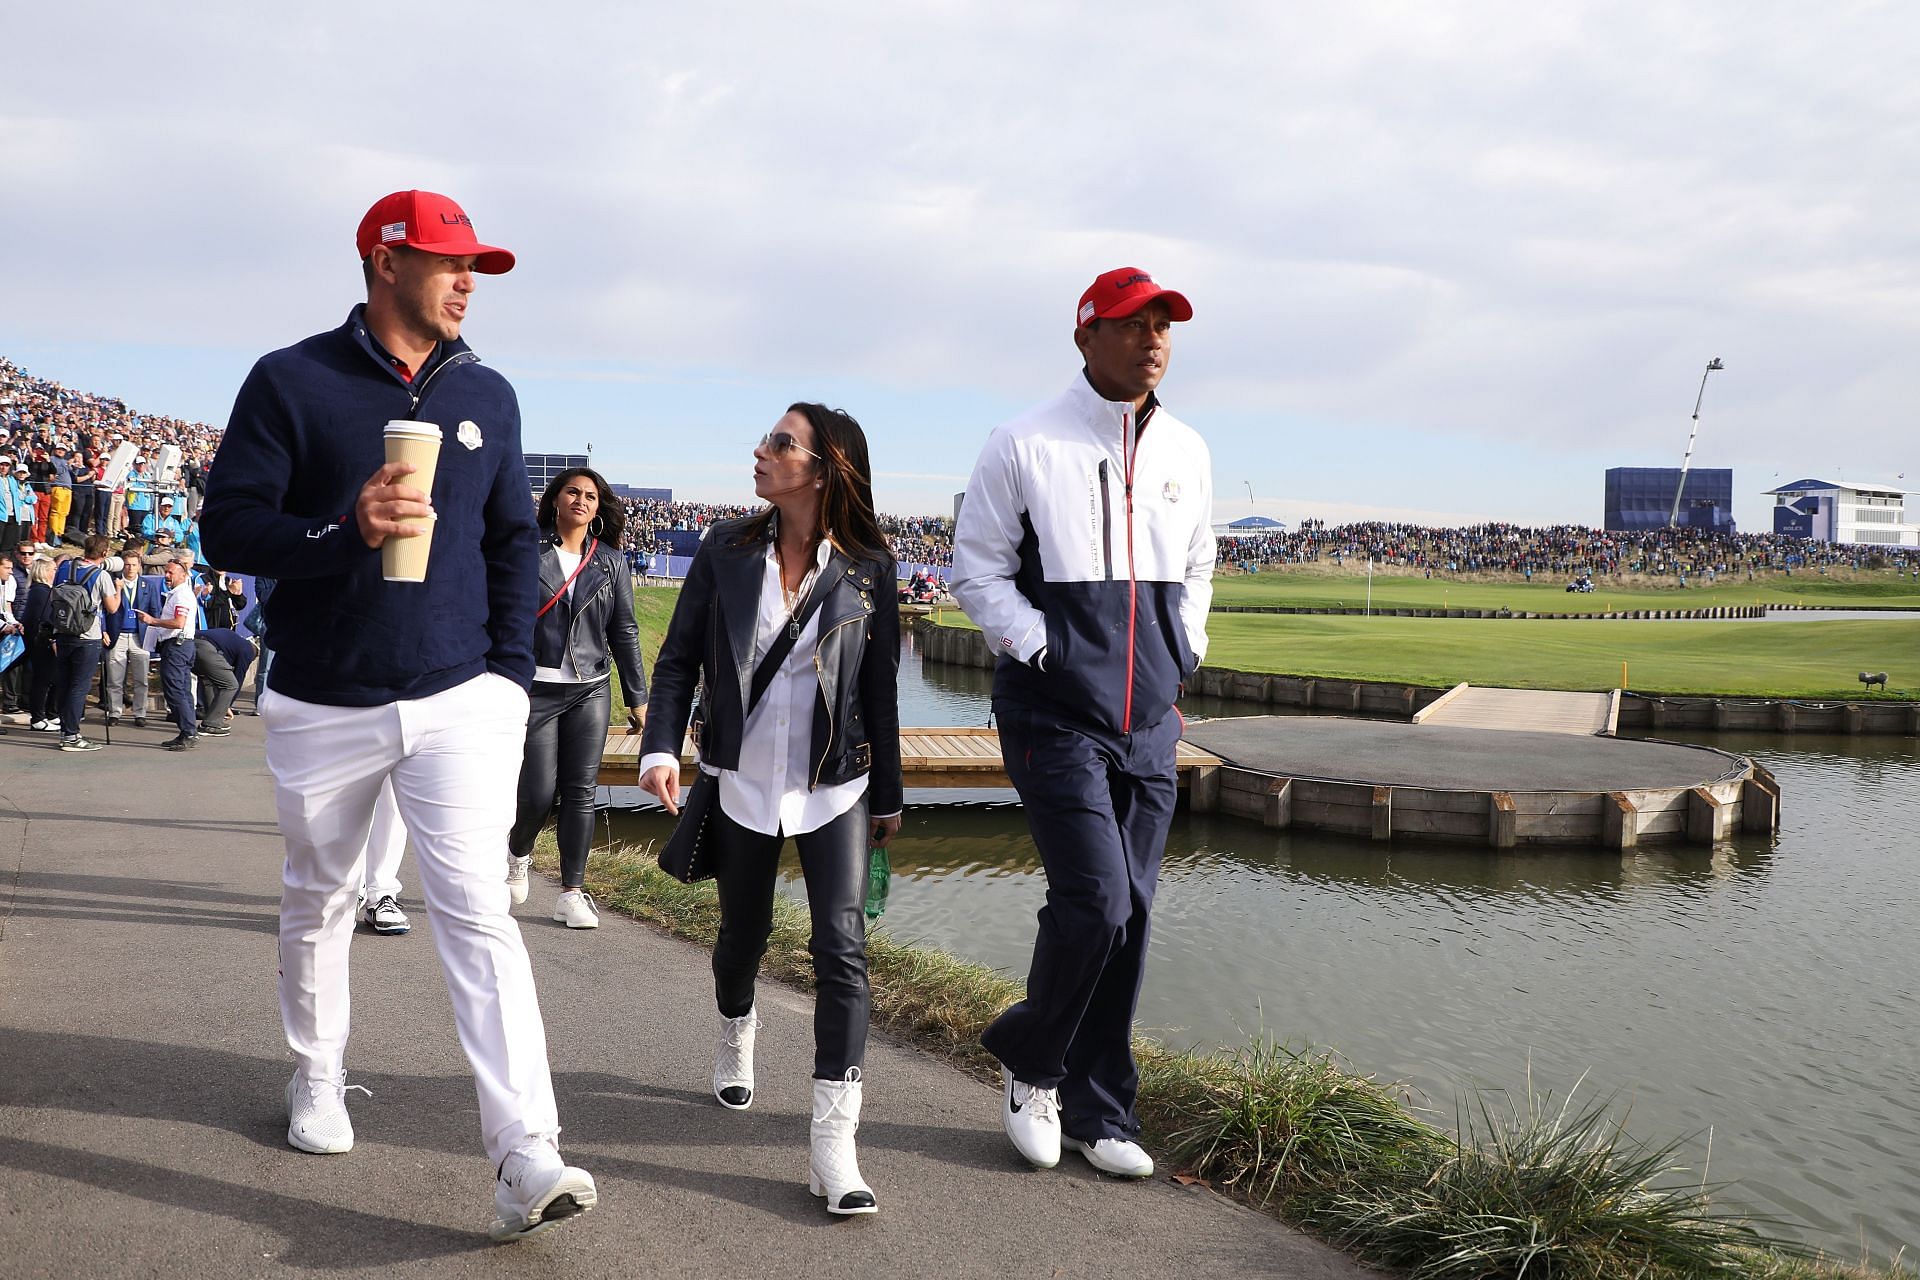 Tiger Woods at the 2018 Ryder Cup (Image via getty)